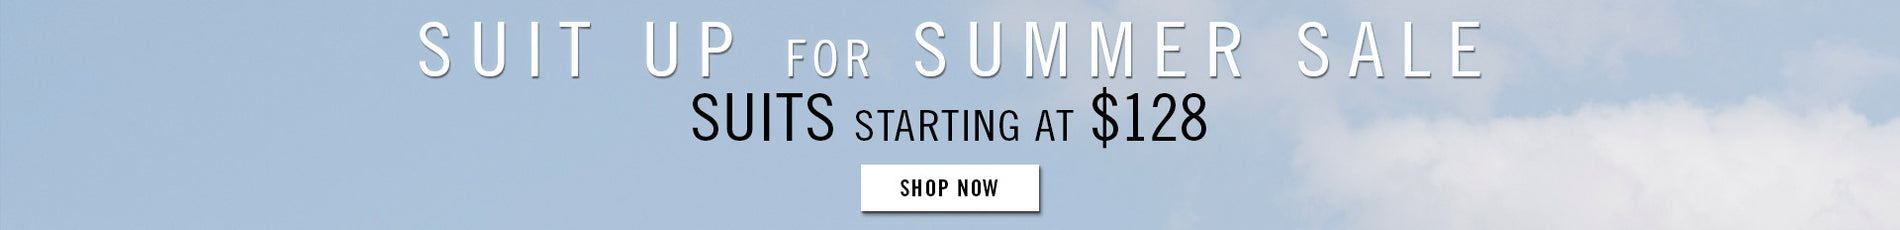 uit up for summer sale - SHOP NOW